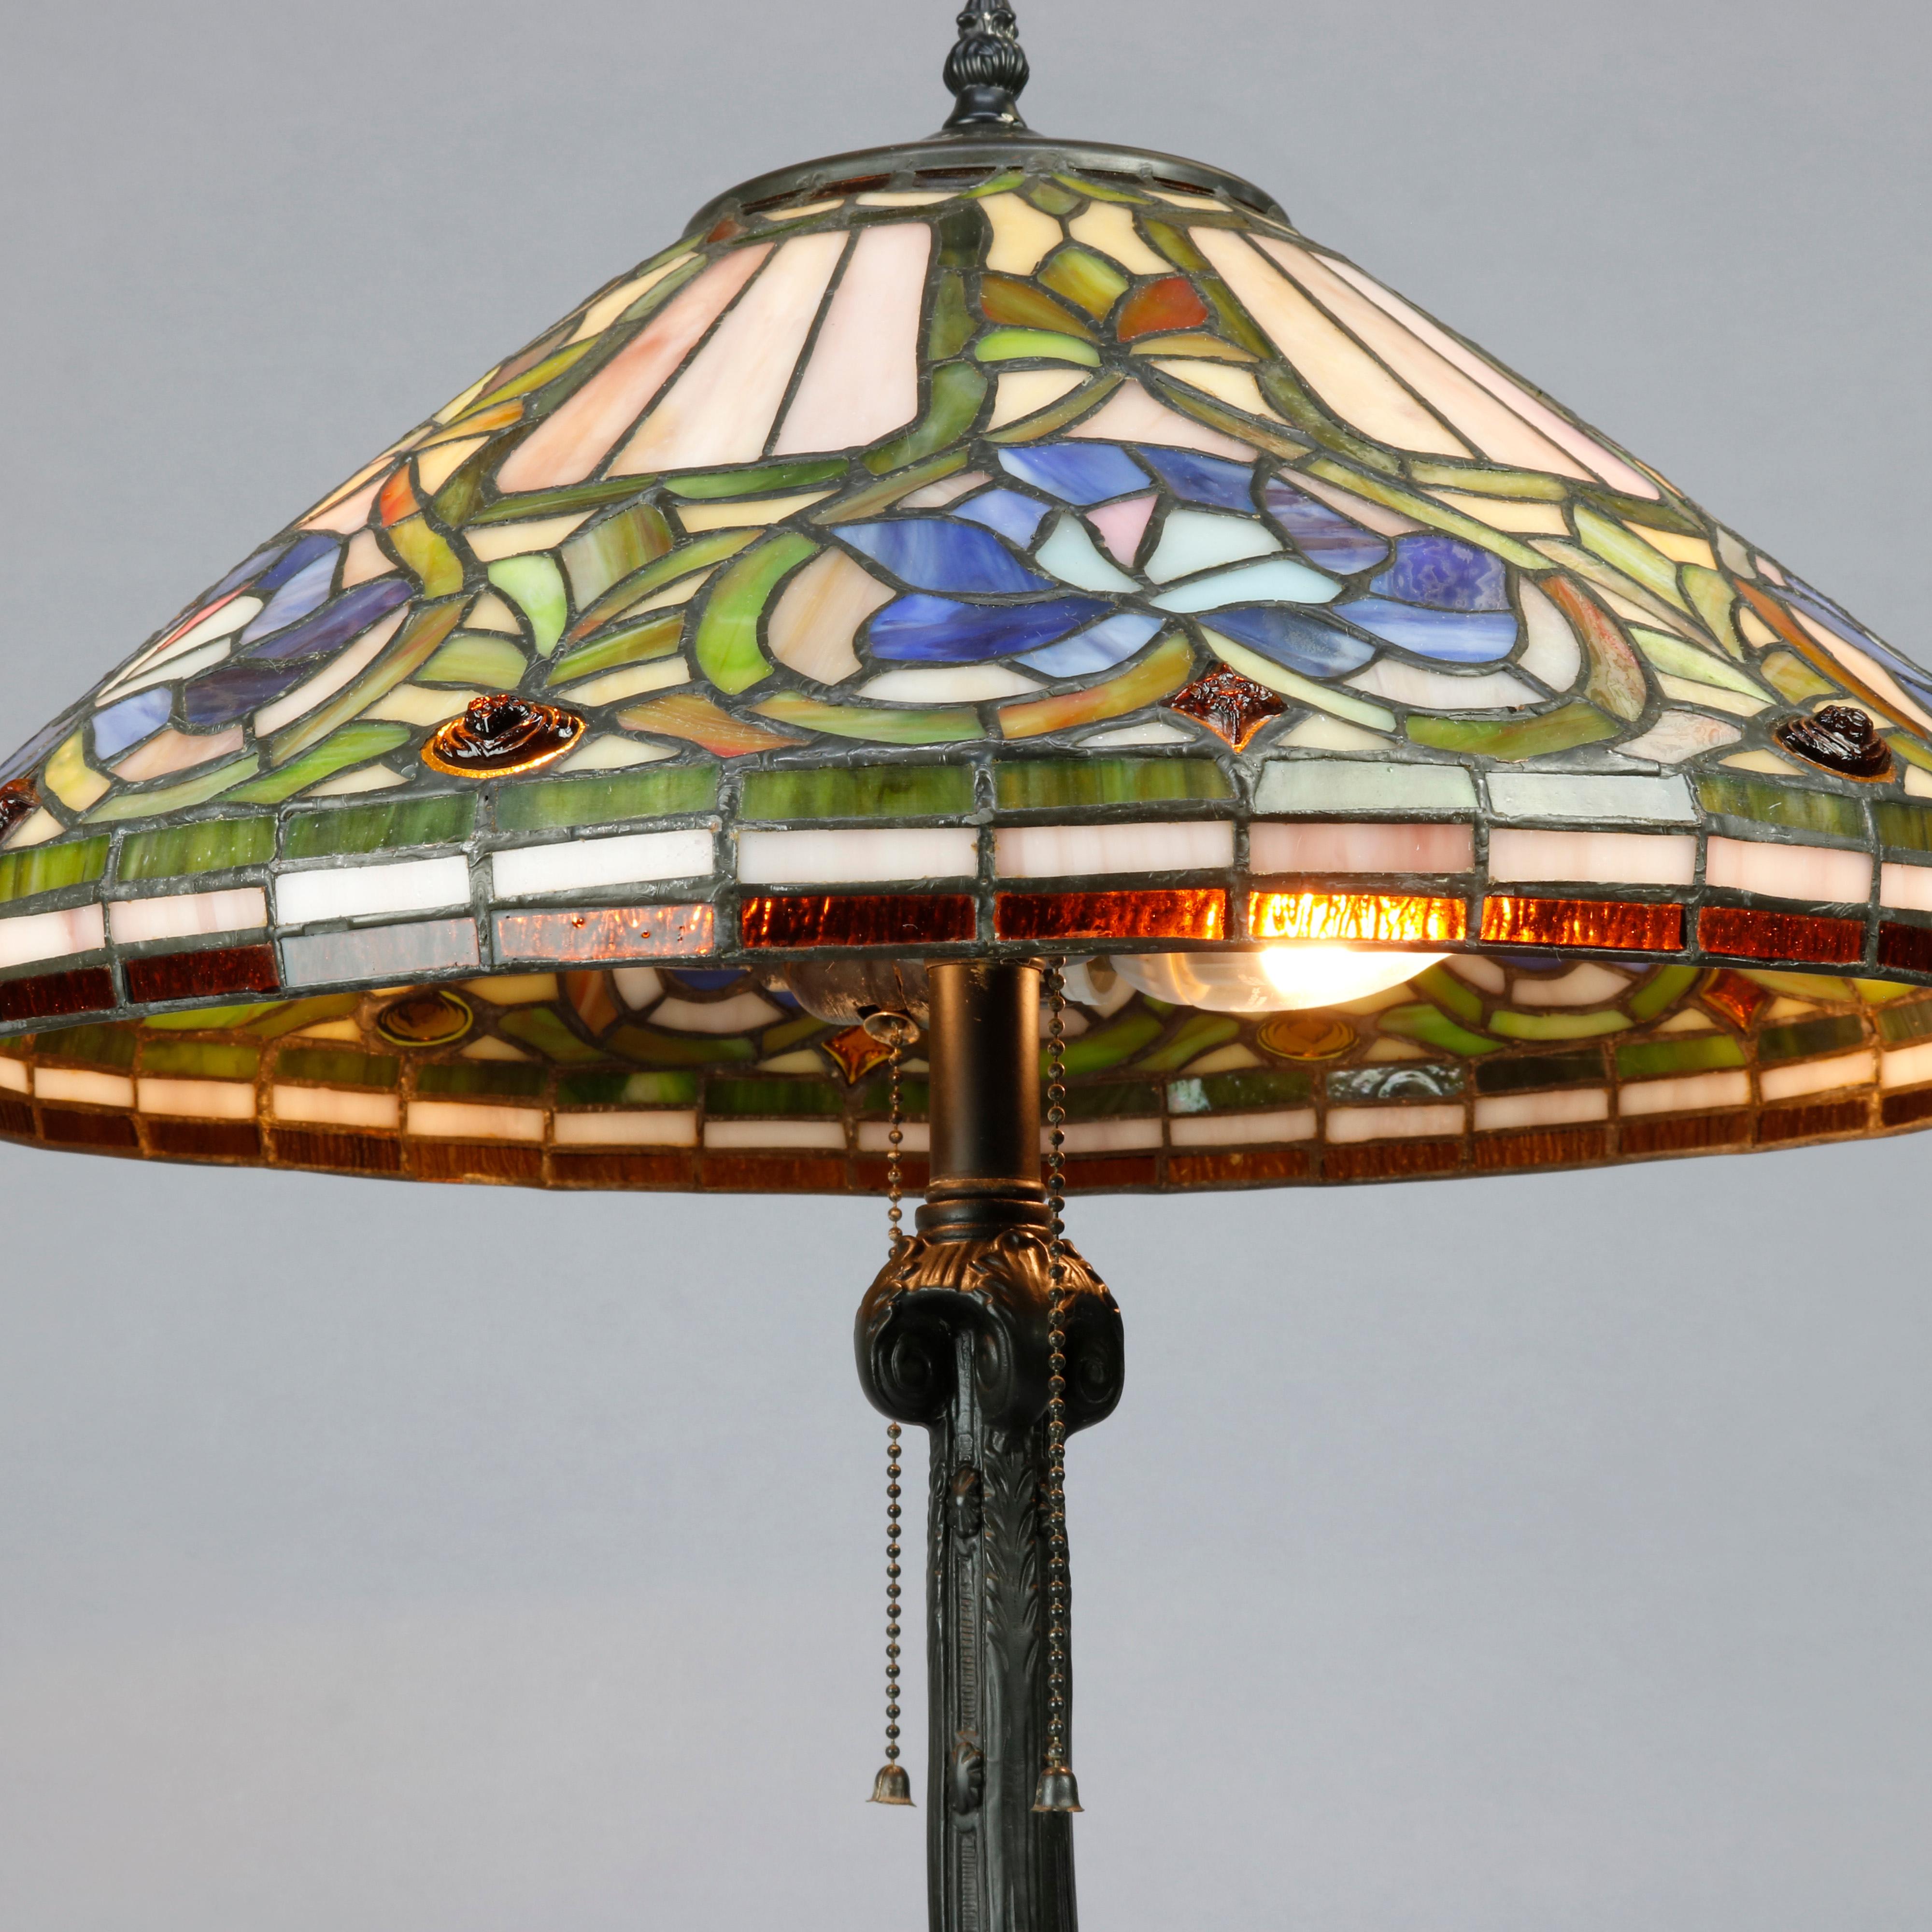 20th Century Antique Arts & Crafts Stylized Floral Slag, Stained and Jewel Glass Lamp